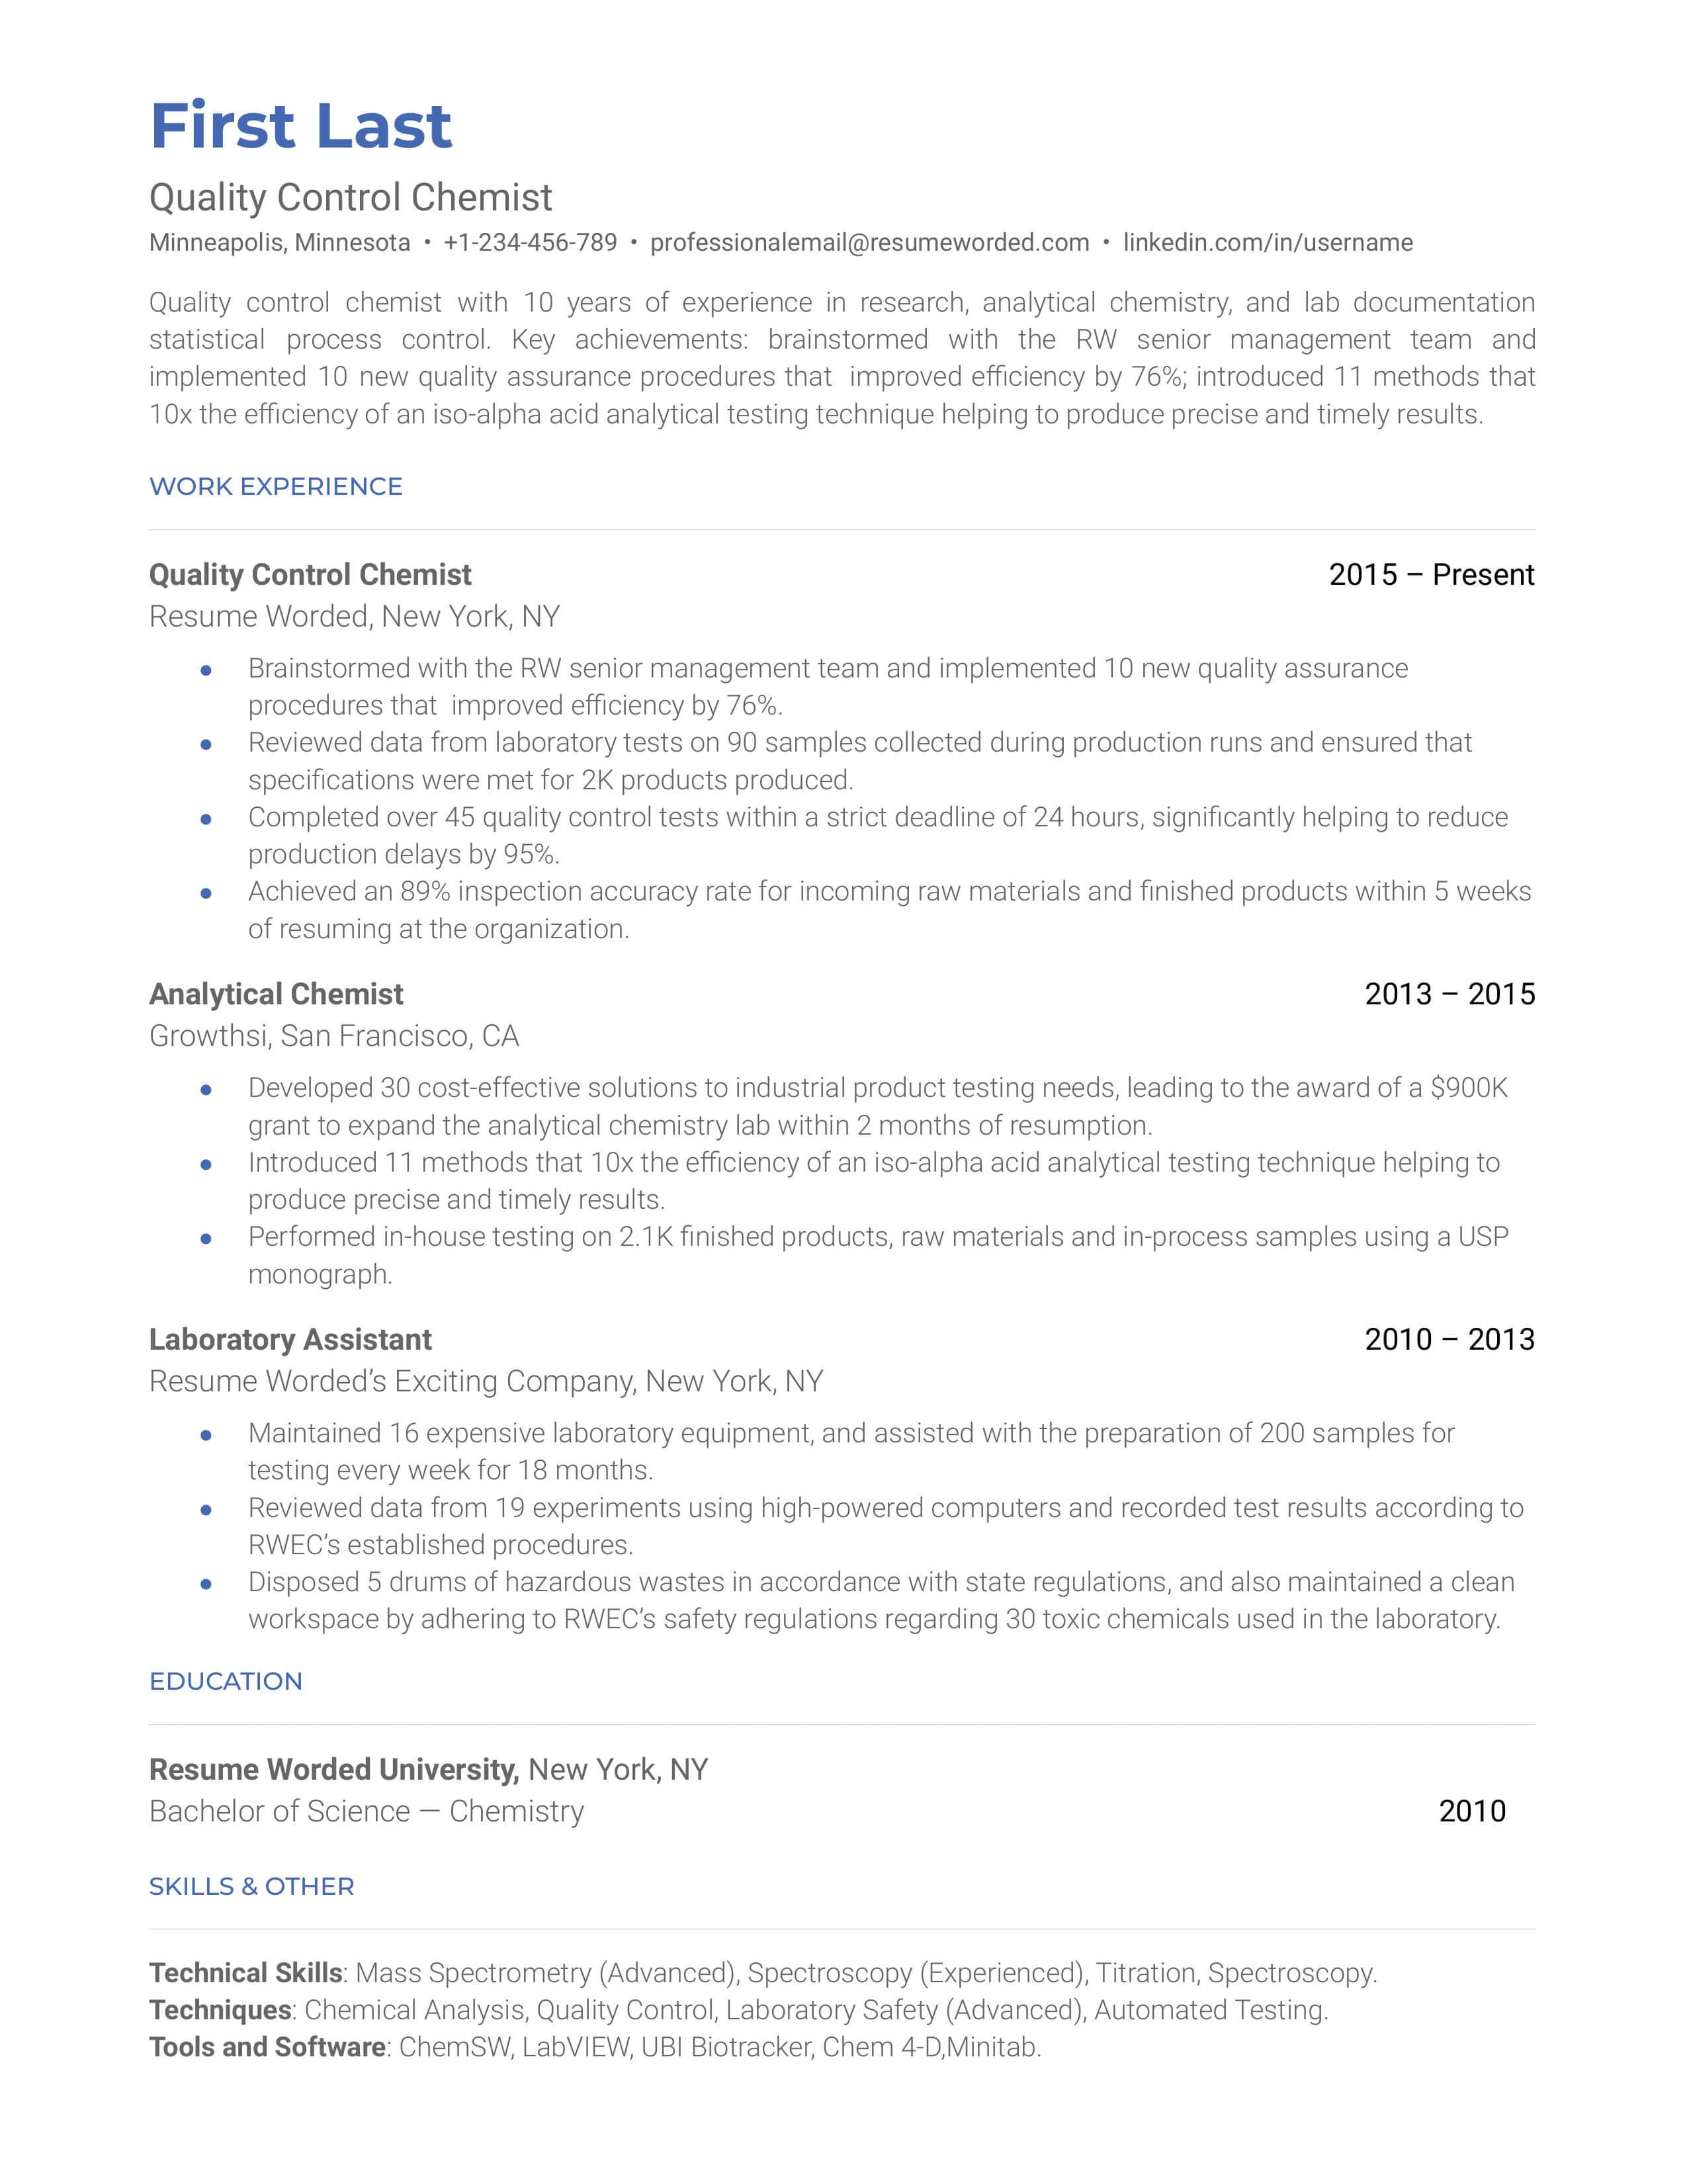 A quality control chemist resume template that showcases a brief description, relevant work history, and contact info.